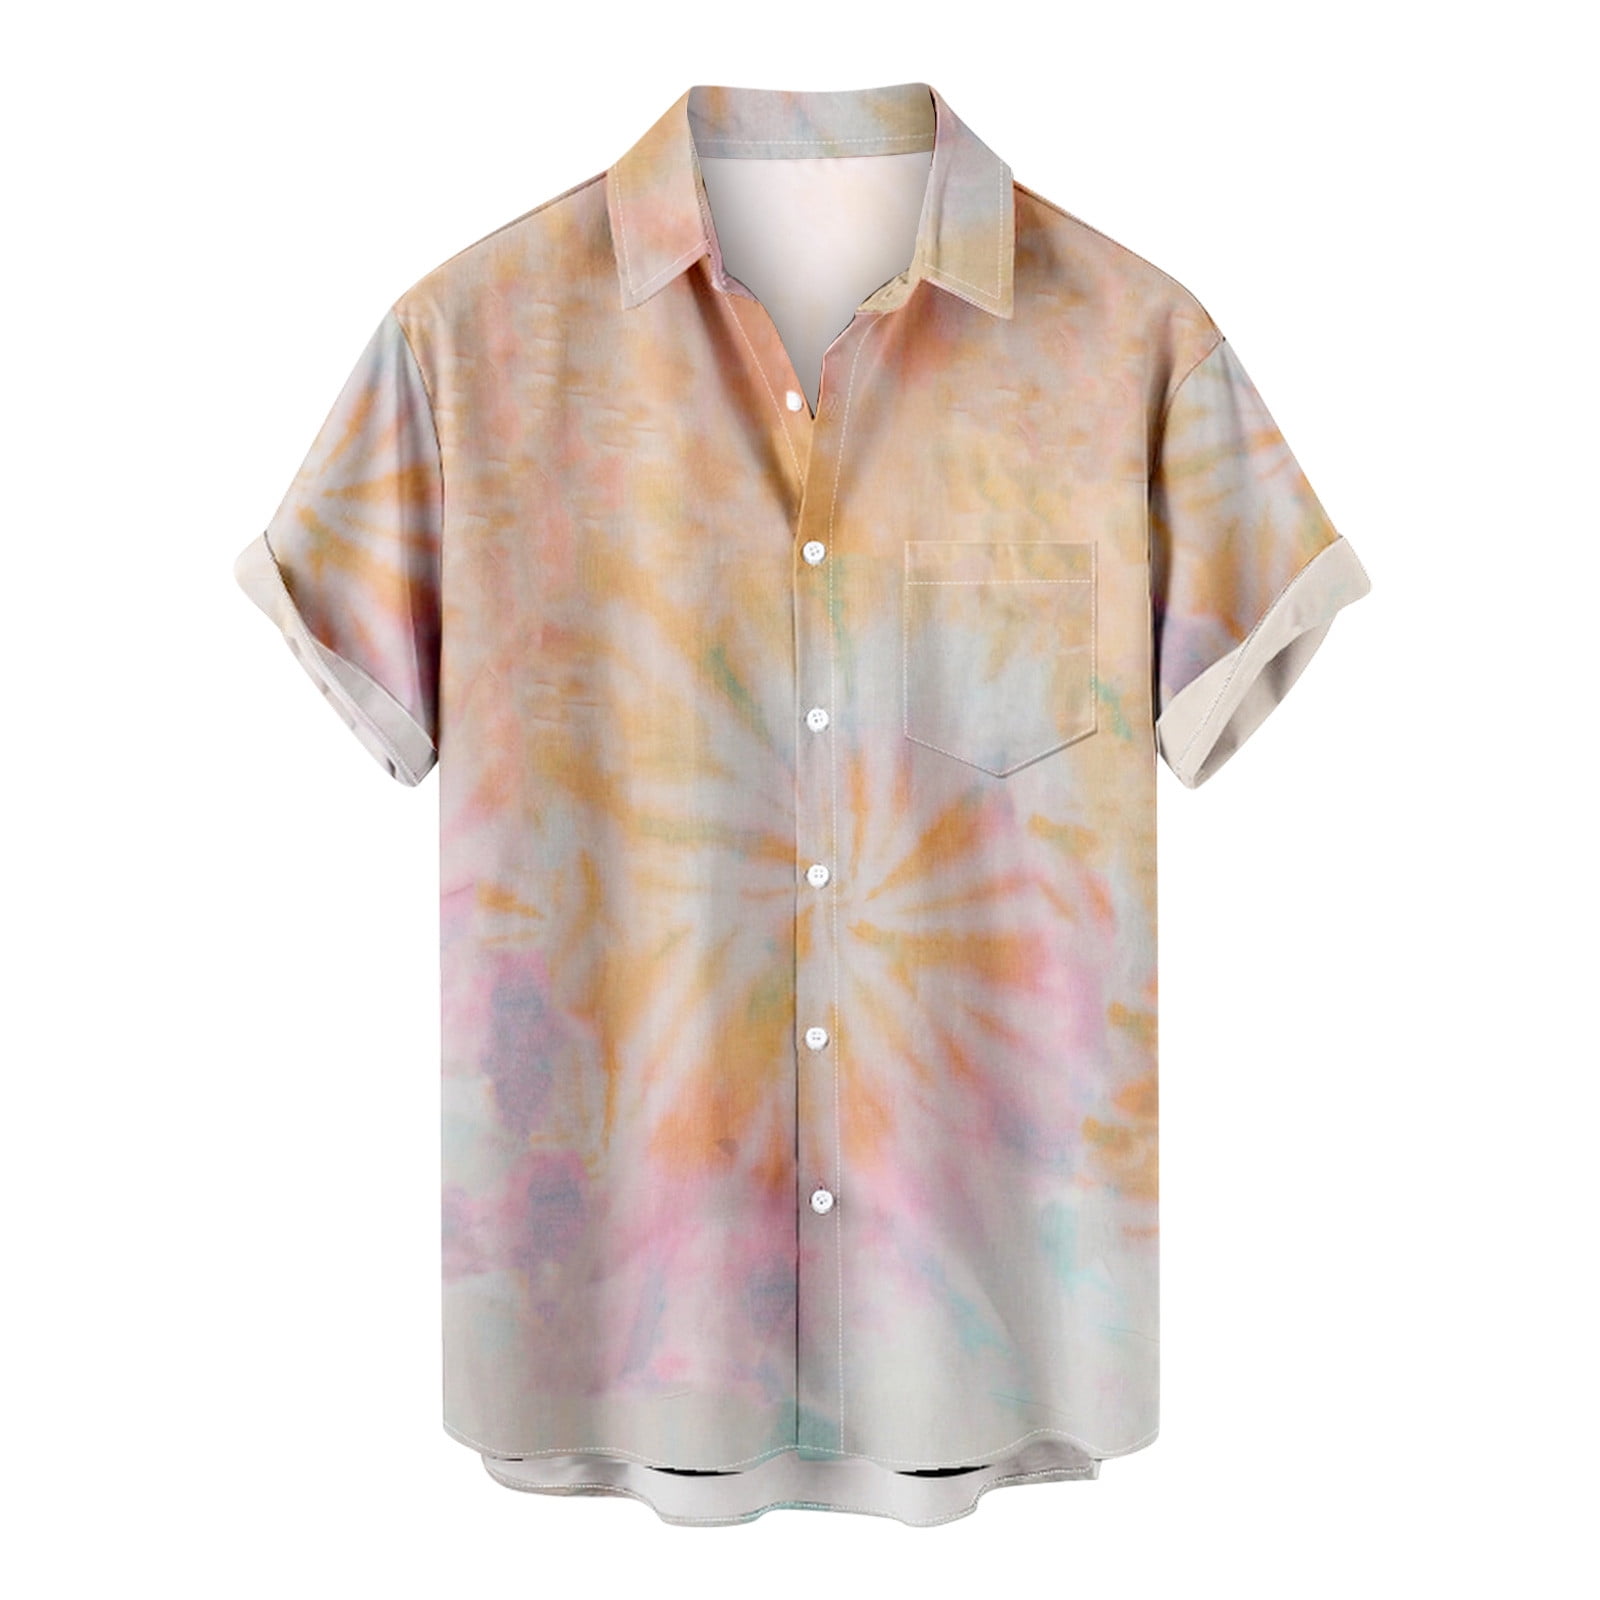 VSSSJ Button Down Shirts for Men Relaxed Fit Tie-Dye Print Short Sleeve  Collared T-Shirts with Front Pocket Casual Thin Beach Tops Blouse Orange  XXXL